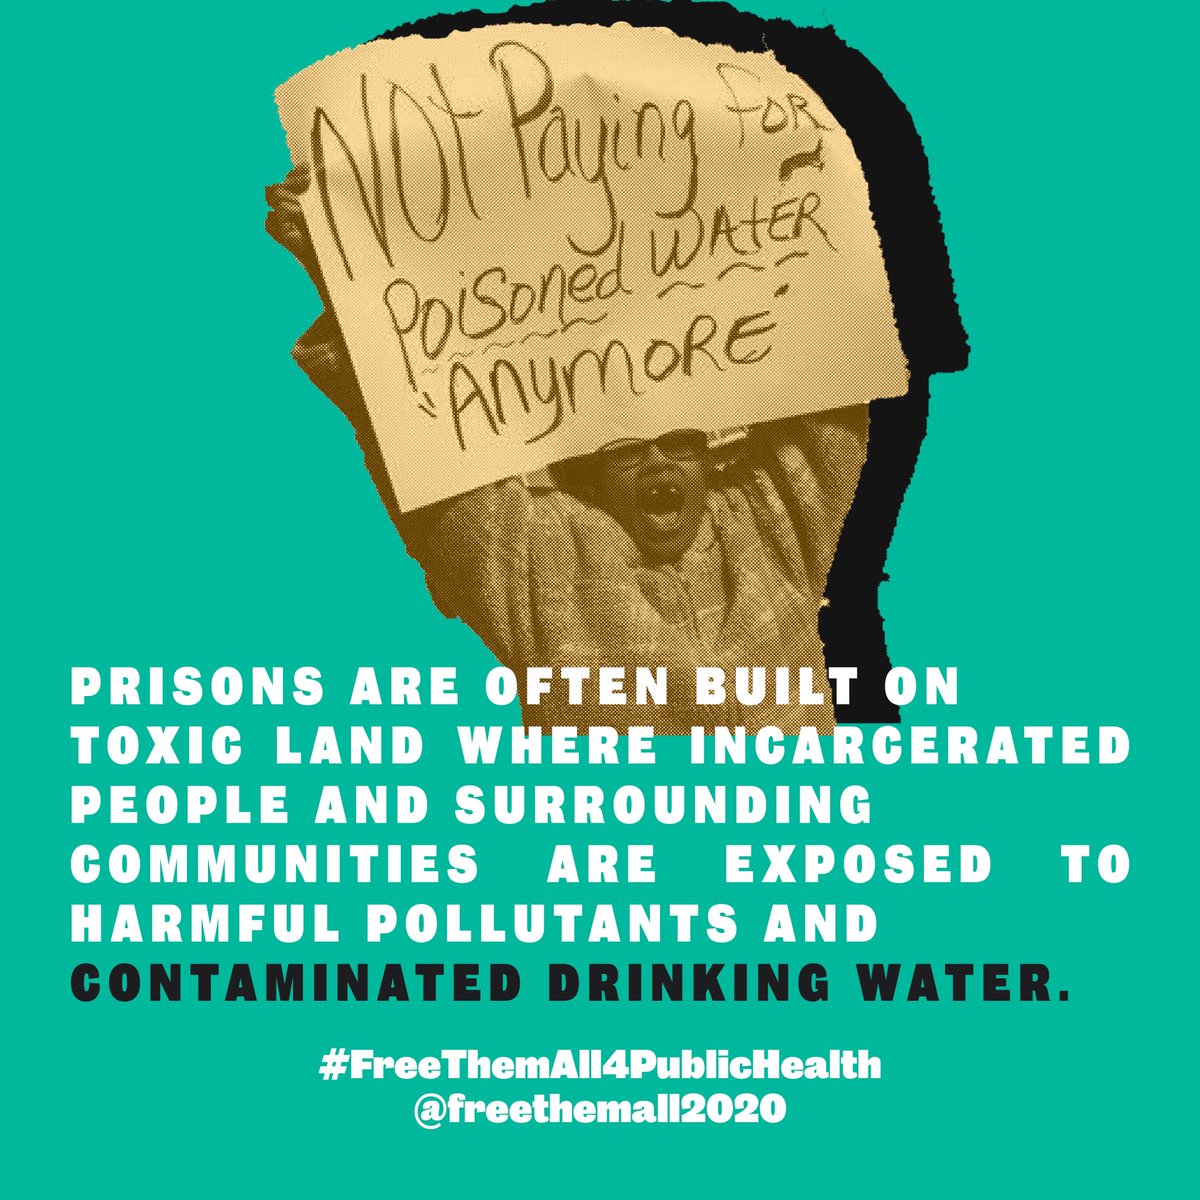 Prisons are often built on toxic land where incarcerated people and surrounding communities are exposed to harmful pollutants and contaminated drinking water.